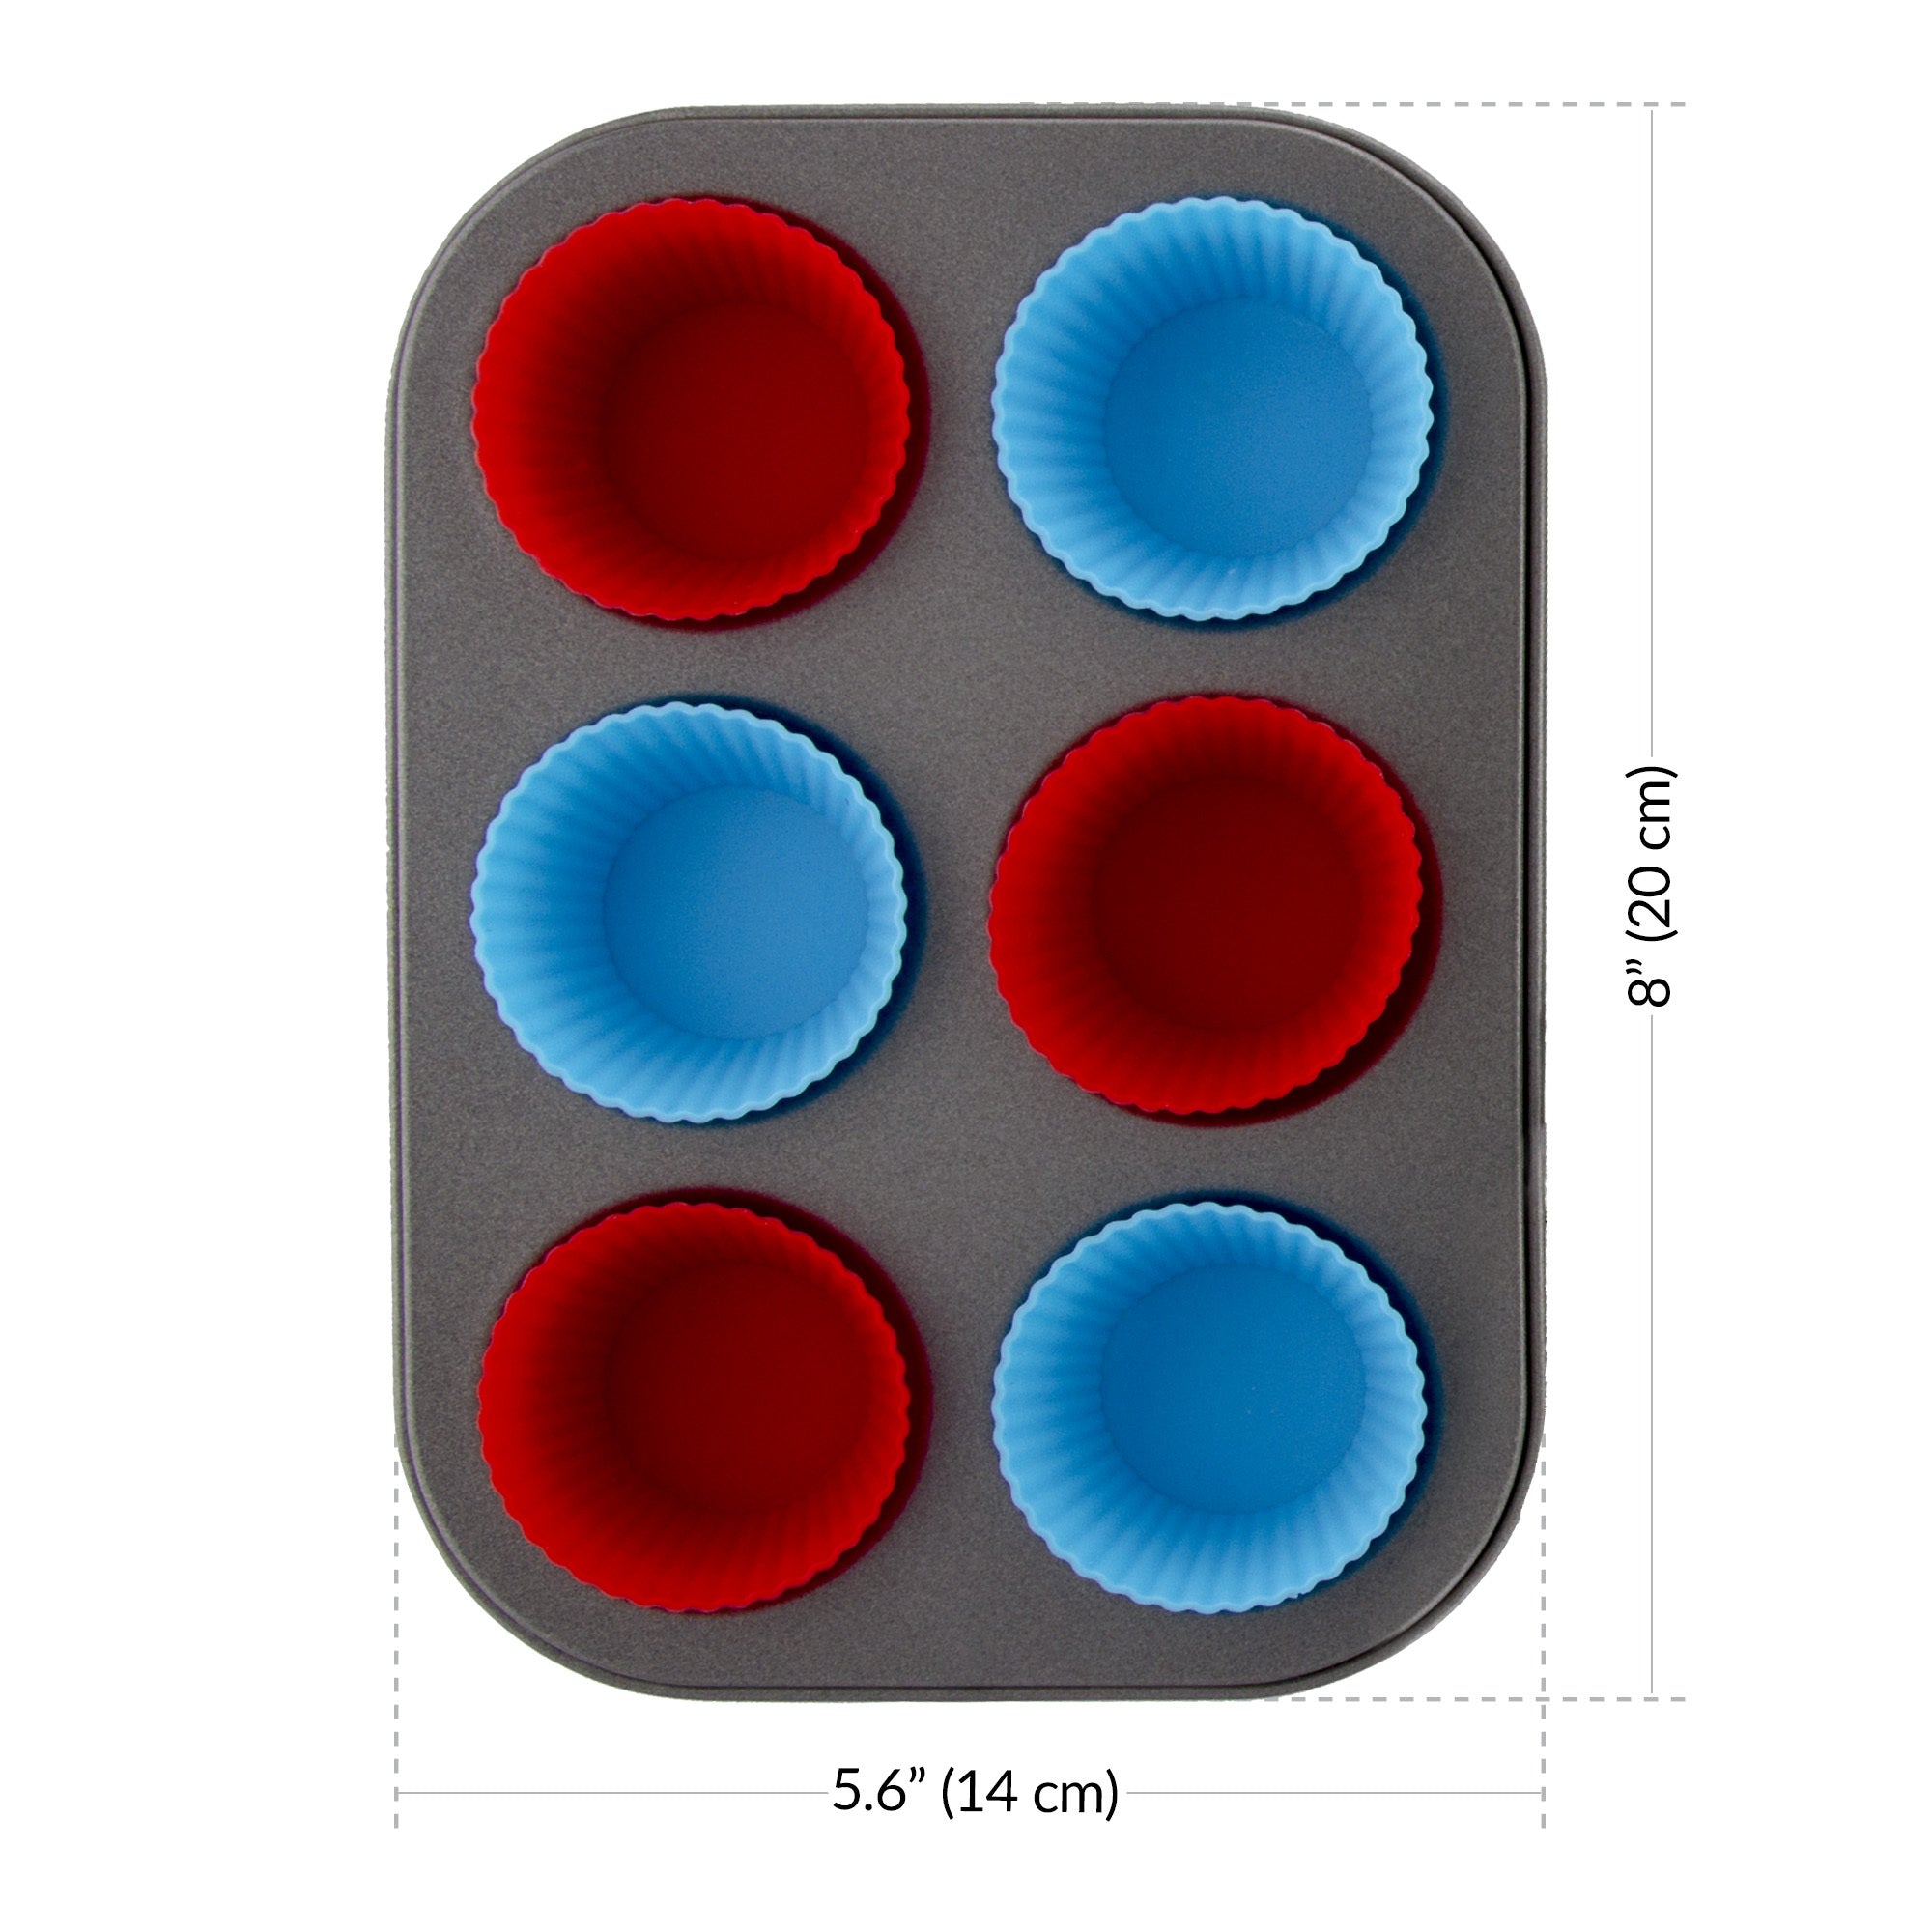 6 cup Silicone Muffin Pan - Whisk